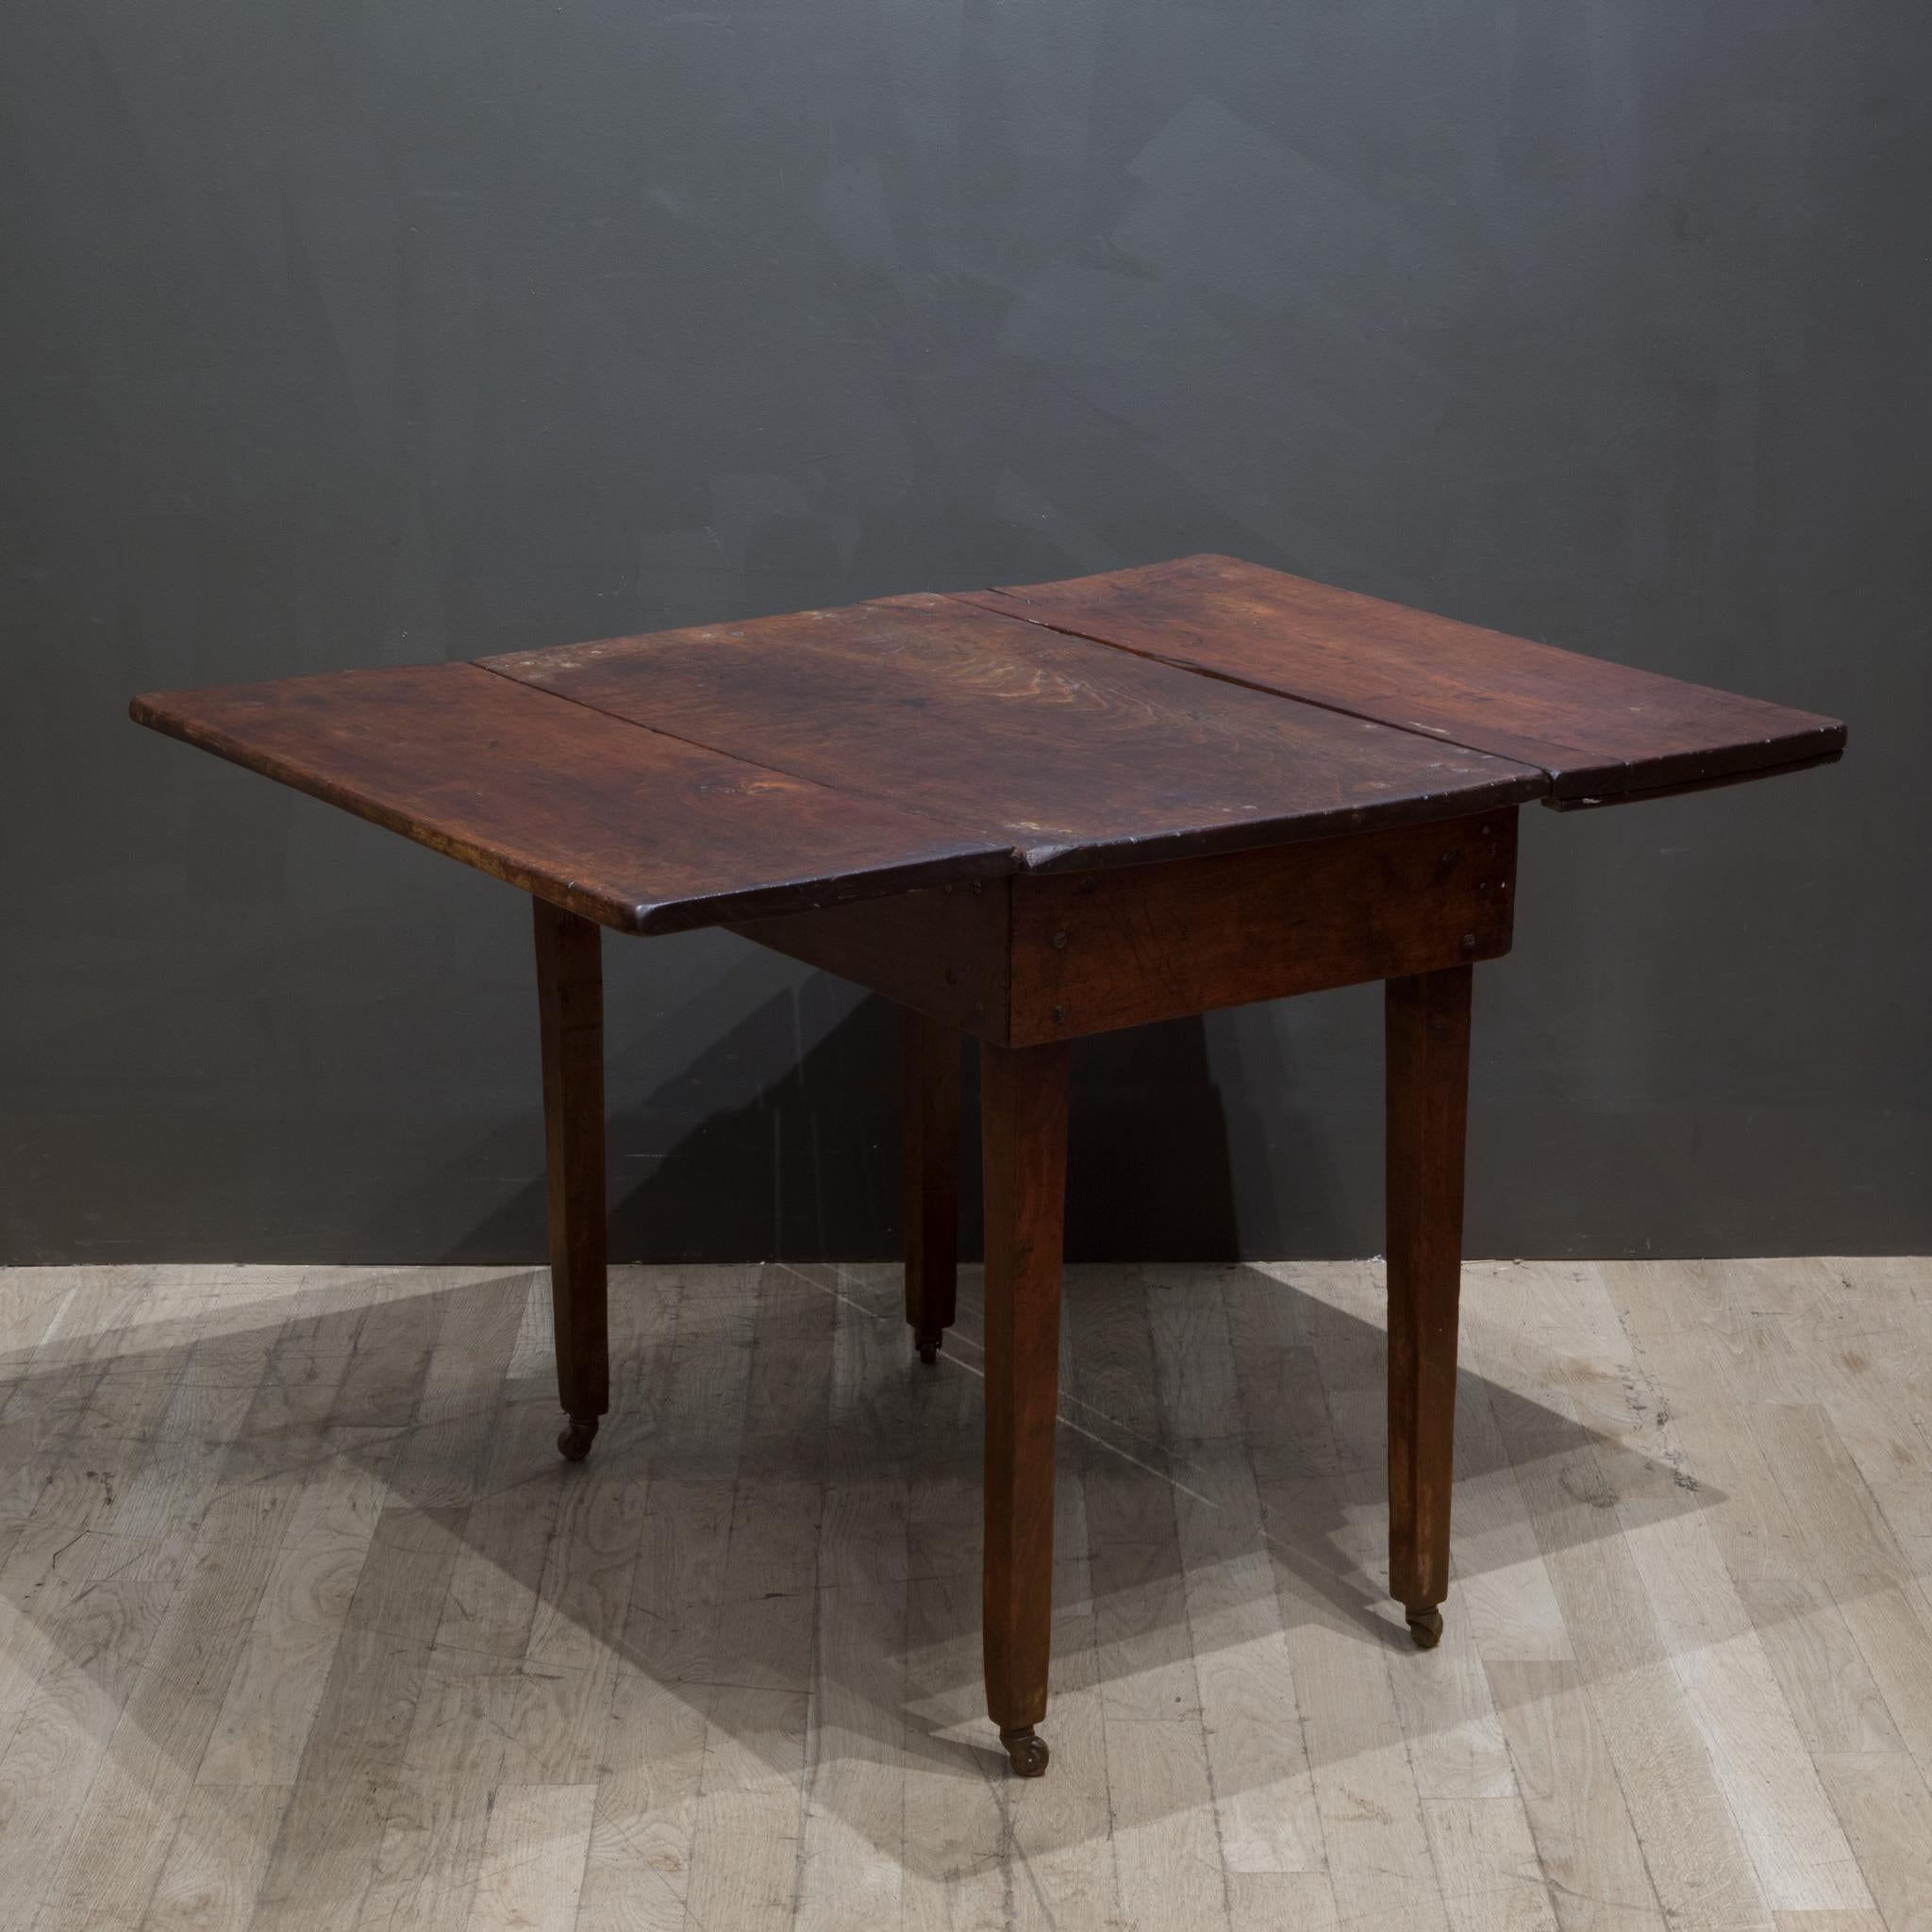 Cherry 19th C./Early 20th C. Rustic Drop Leaf Dining Table / Console, C.1880-1920